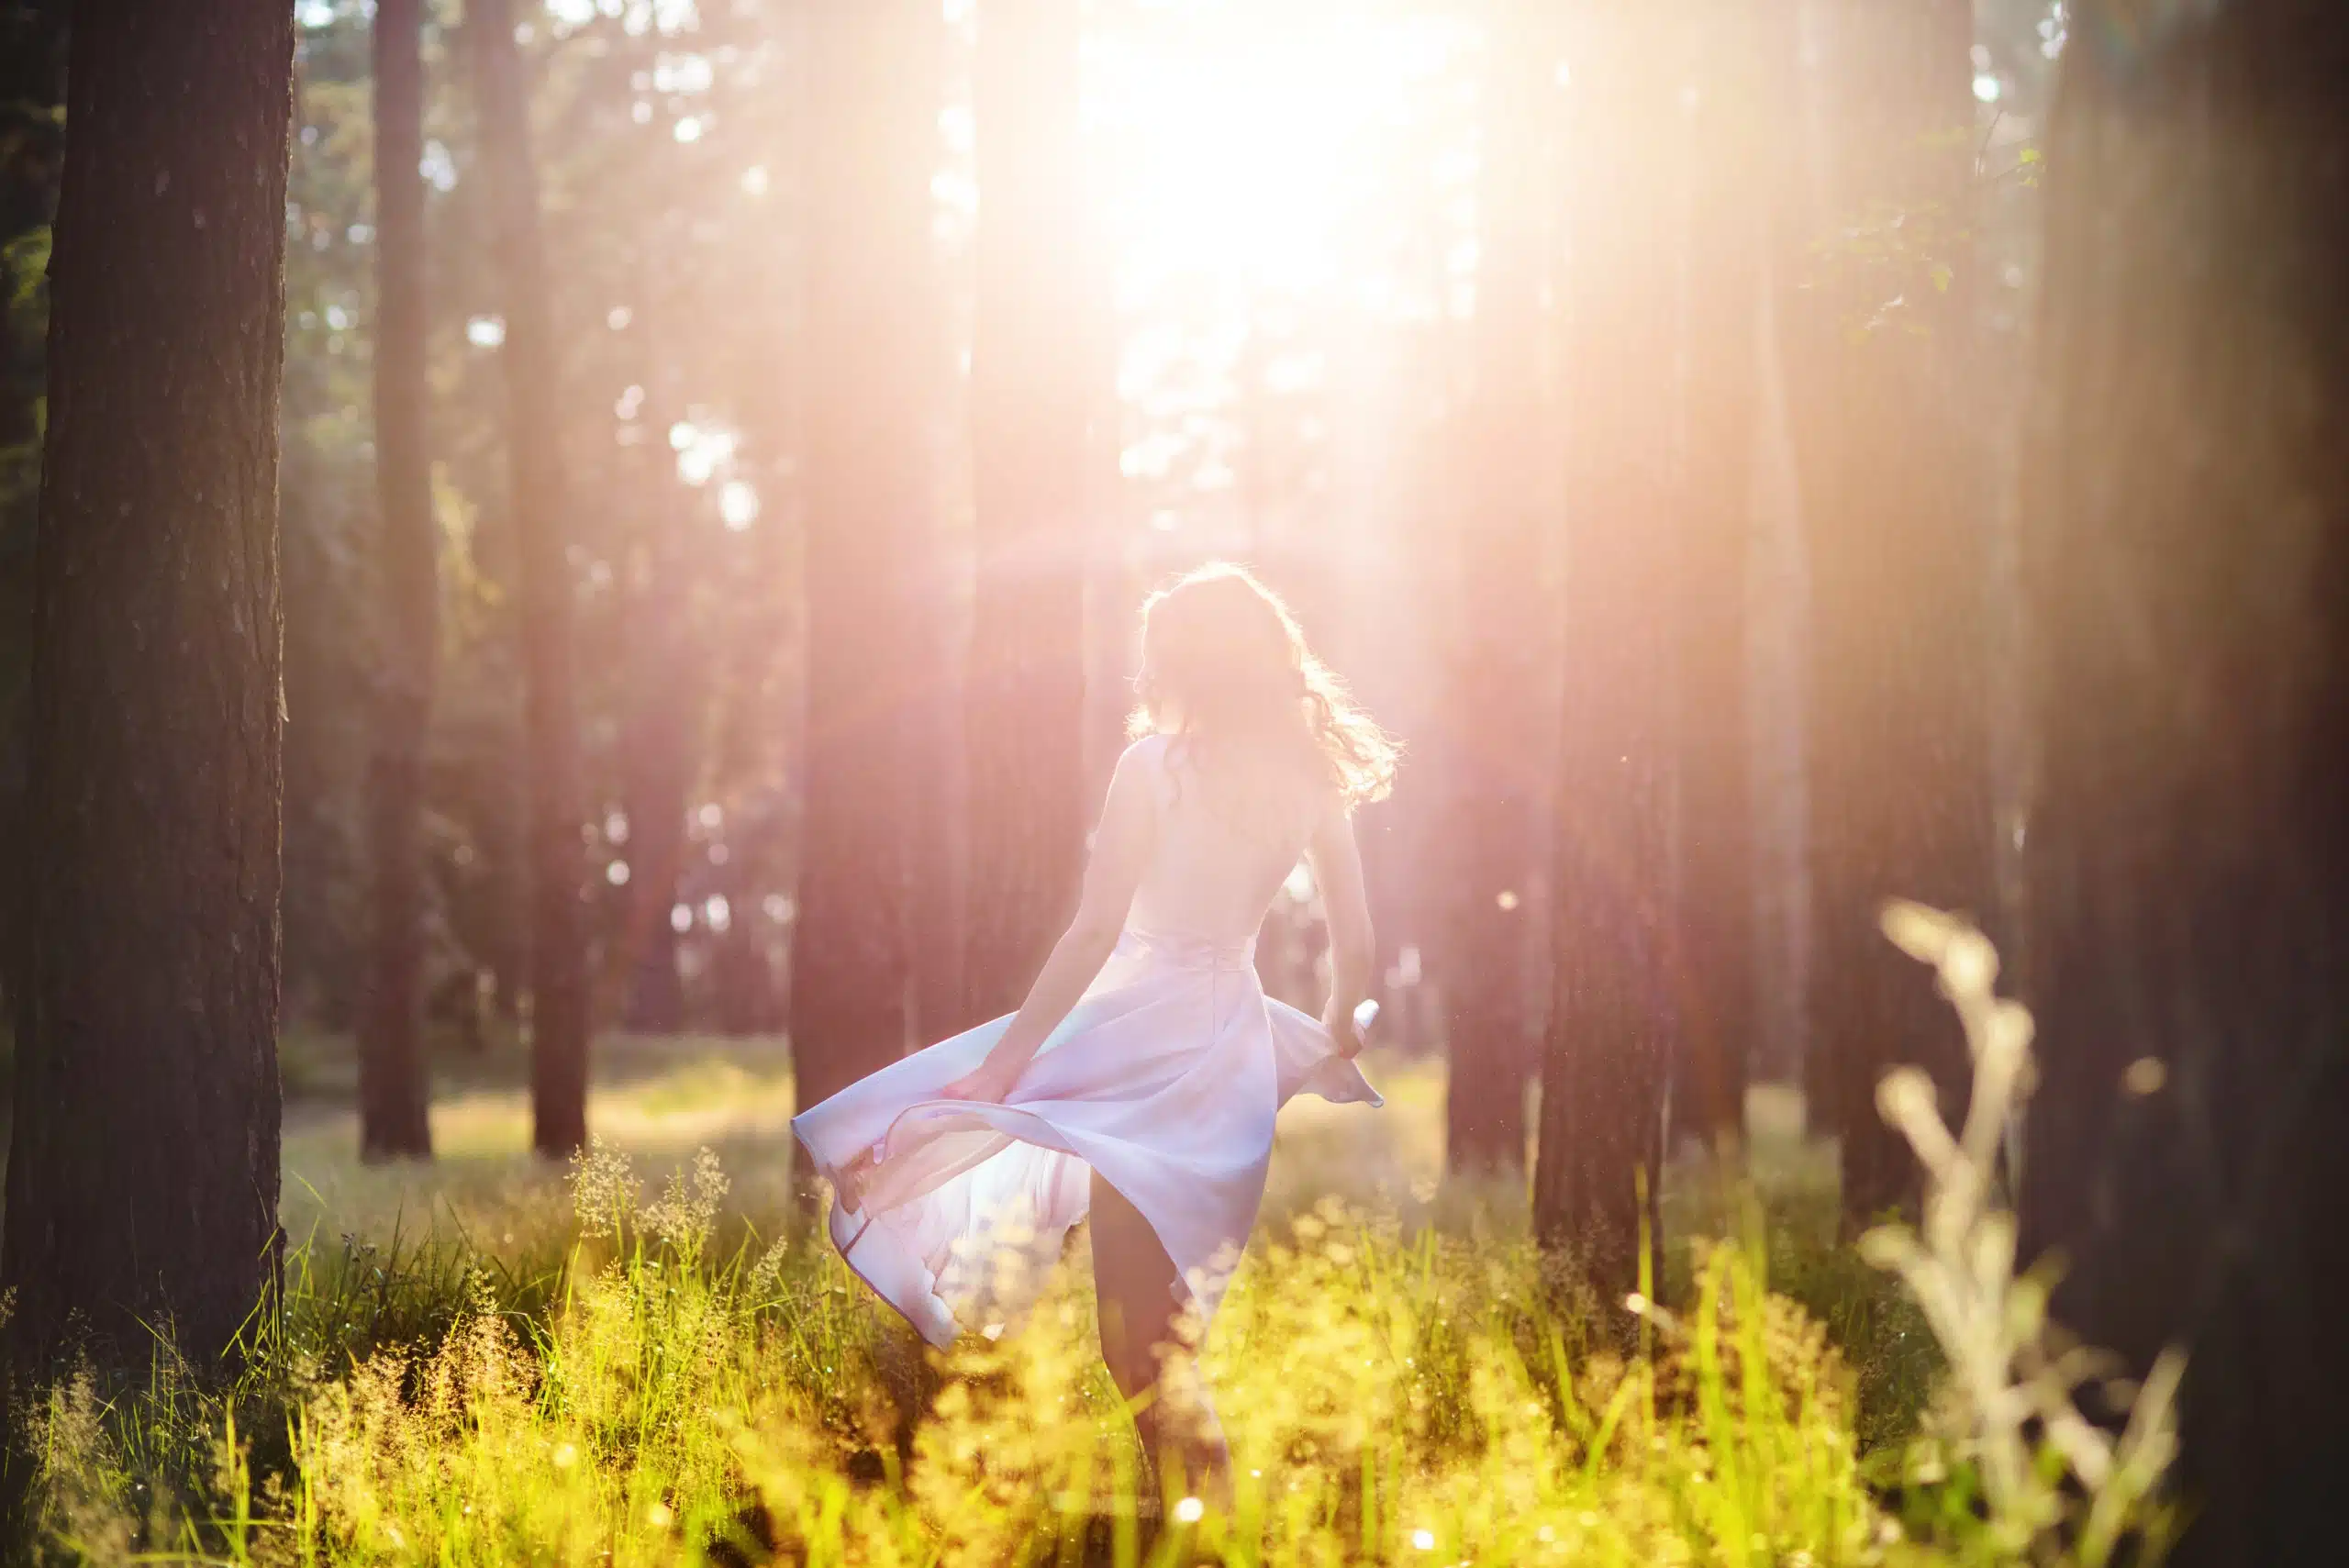 Beautiful young woman wearing elegant light blue dress standing in the forest with rays of sunlight beaming through the leaves of the trees.